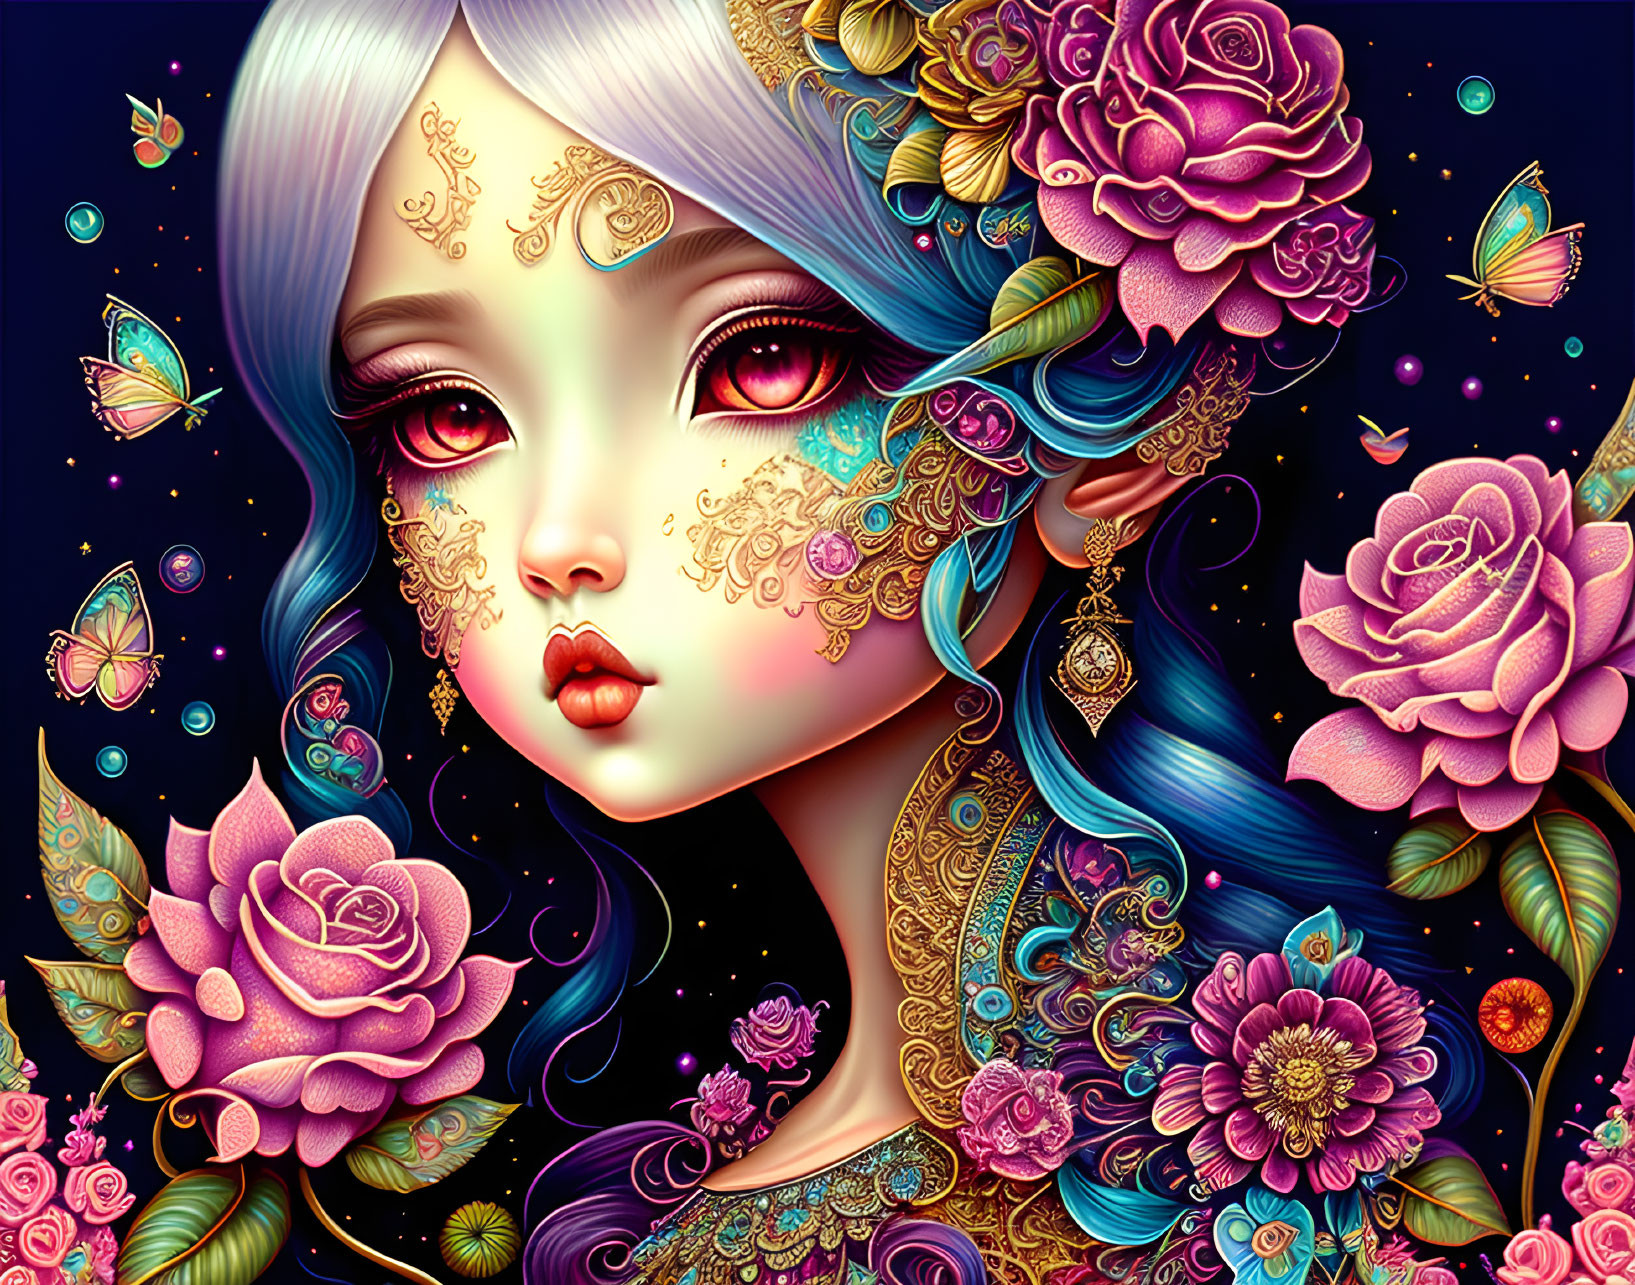 Colorful Female Figure with Gold Facial Tattoos & Floral Motifs